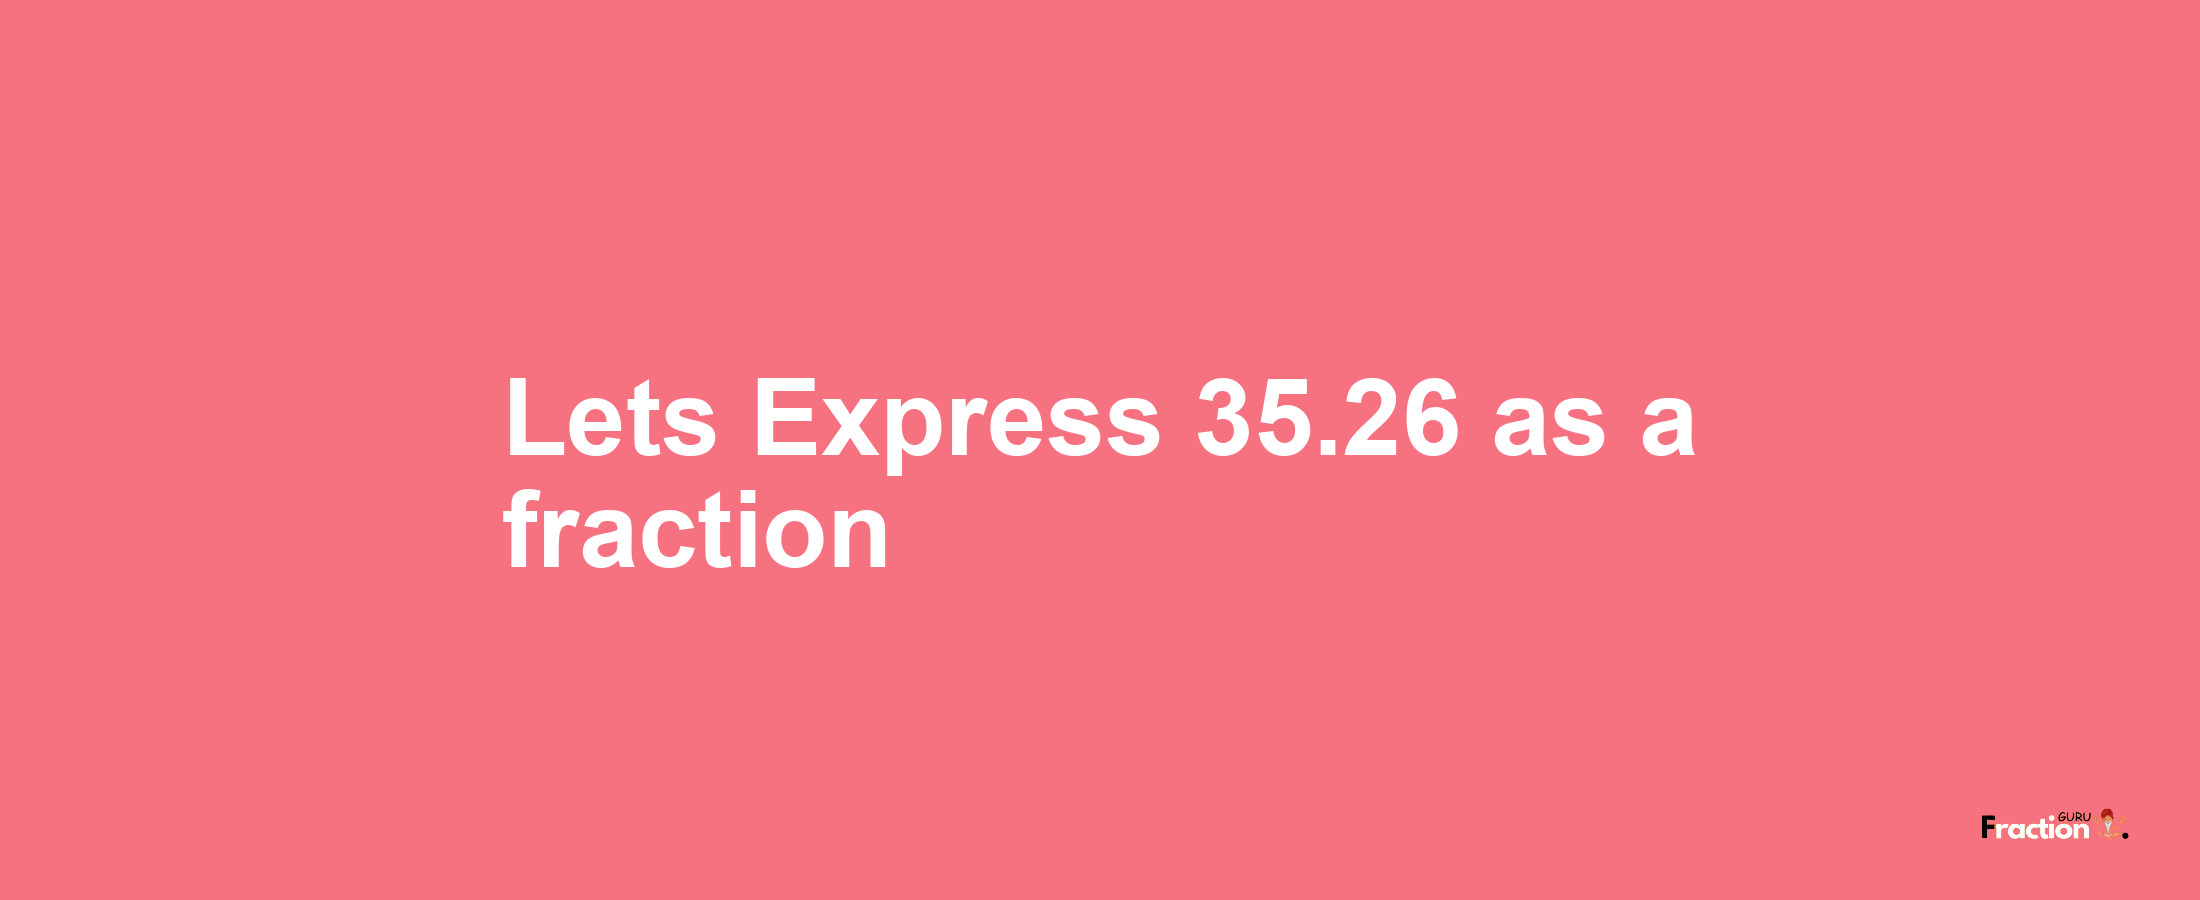 Lets Express 35.26 as afraction